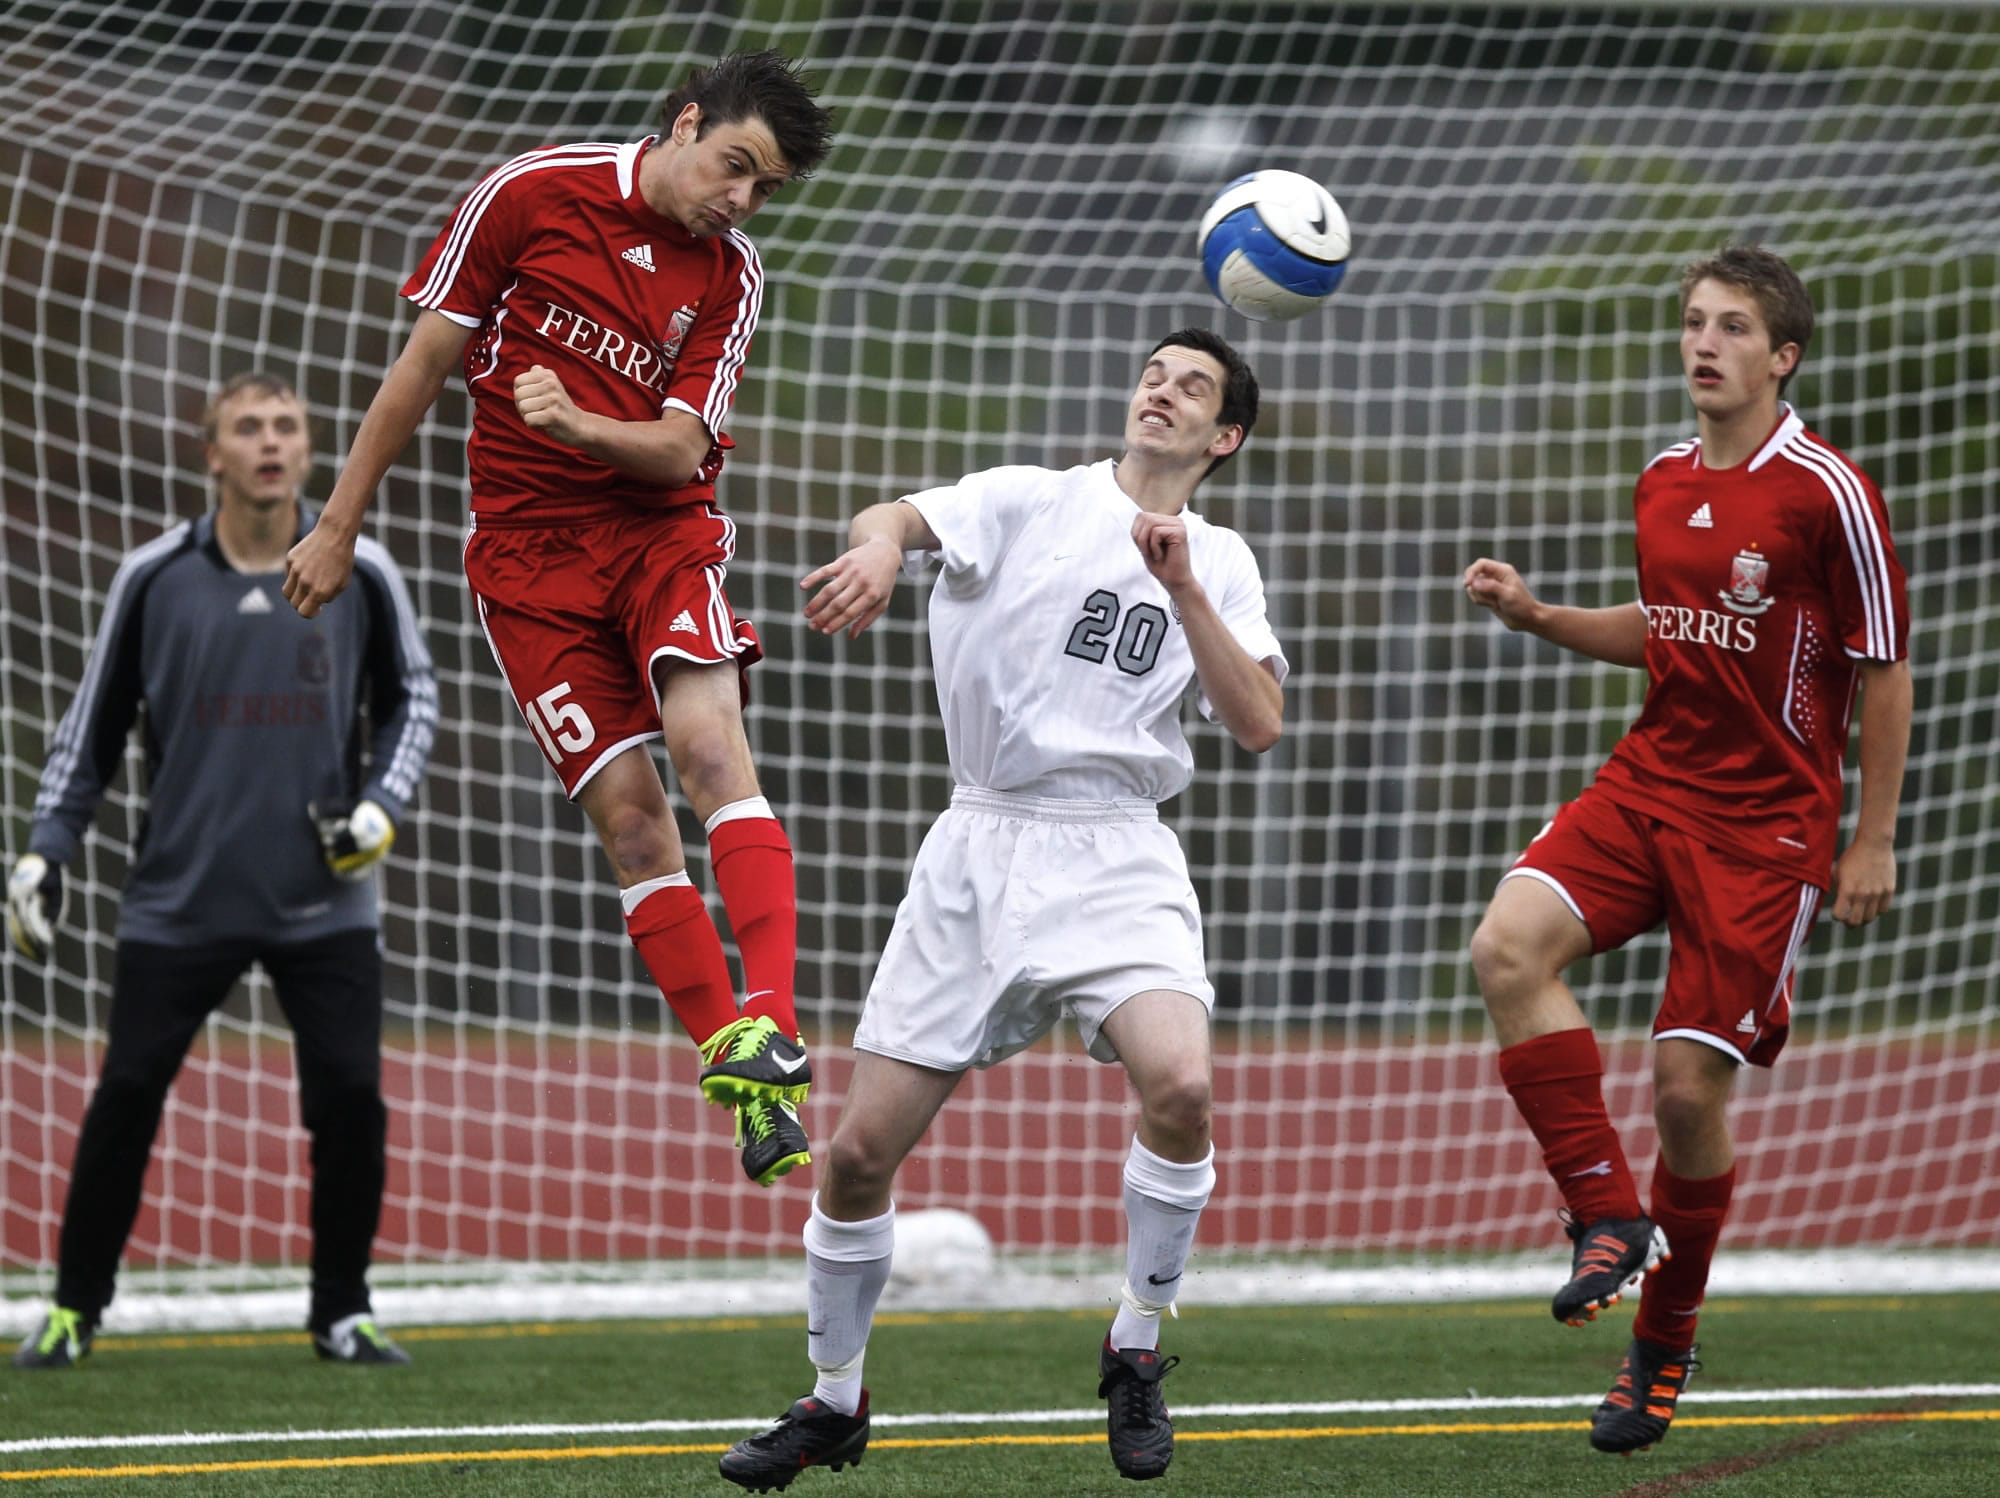 Union defender Luke Foster (20) plays ball in front of Ferris goal during state soccer quarterfinal game Saturday.